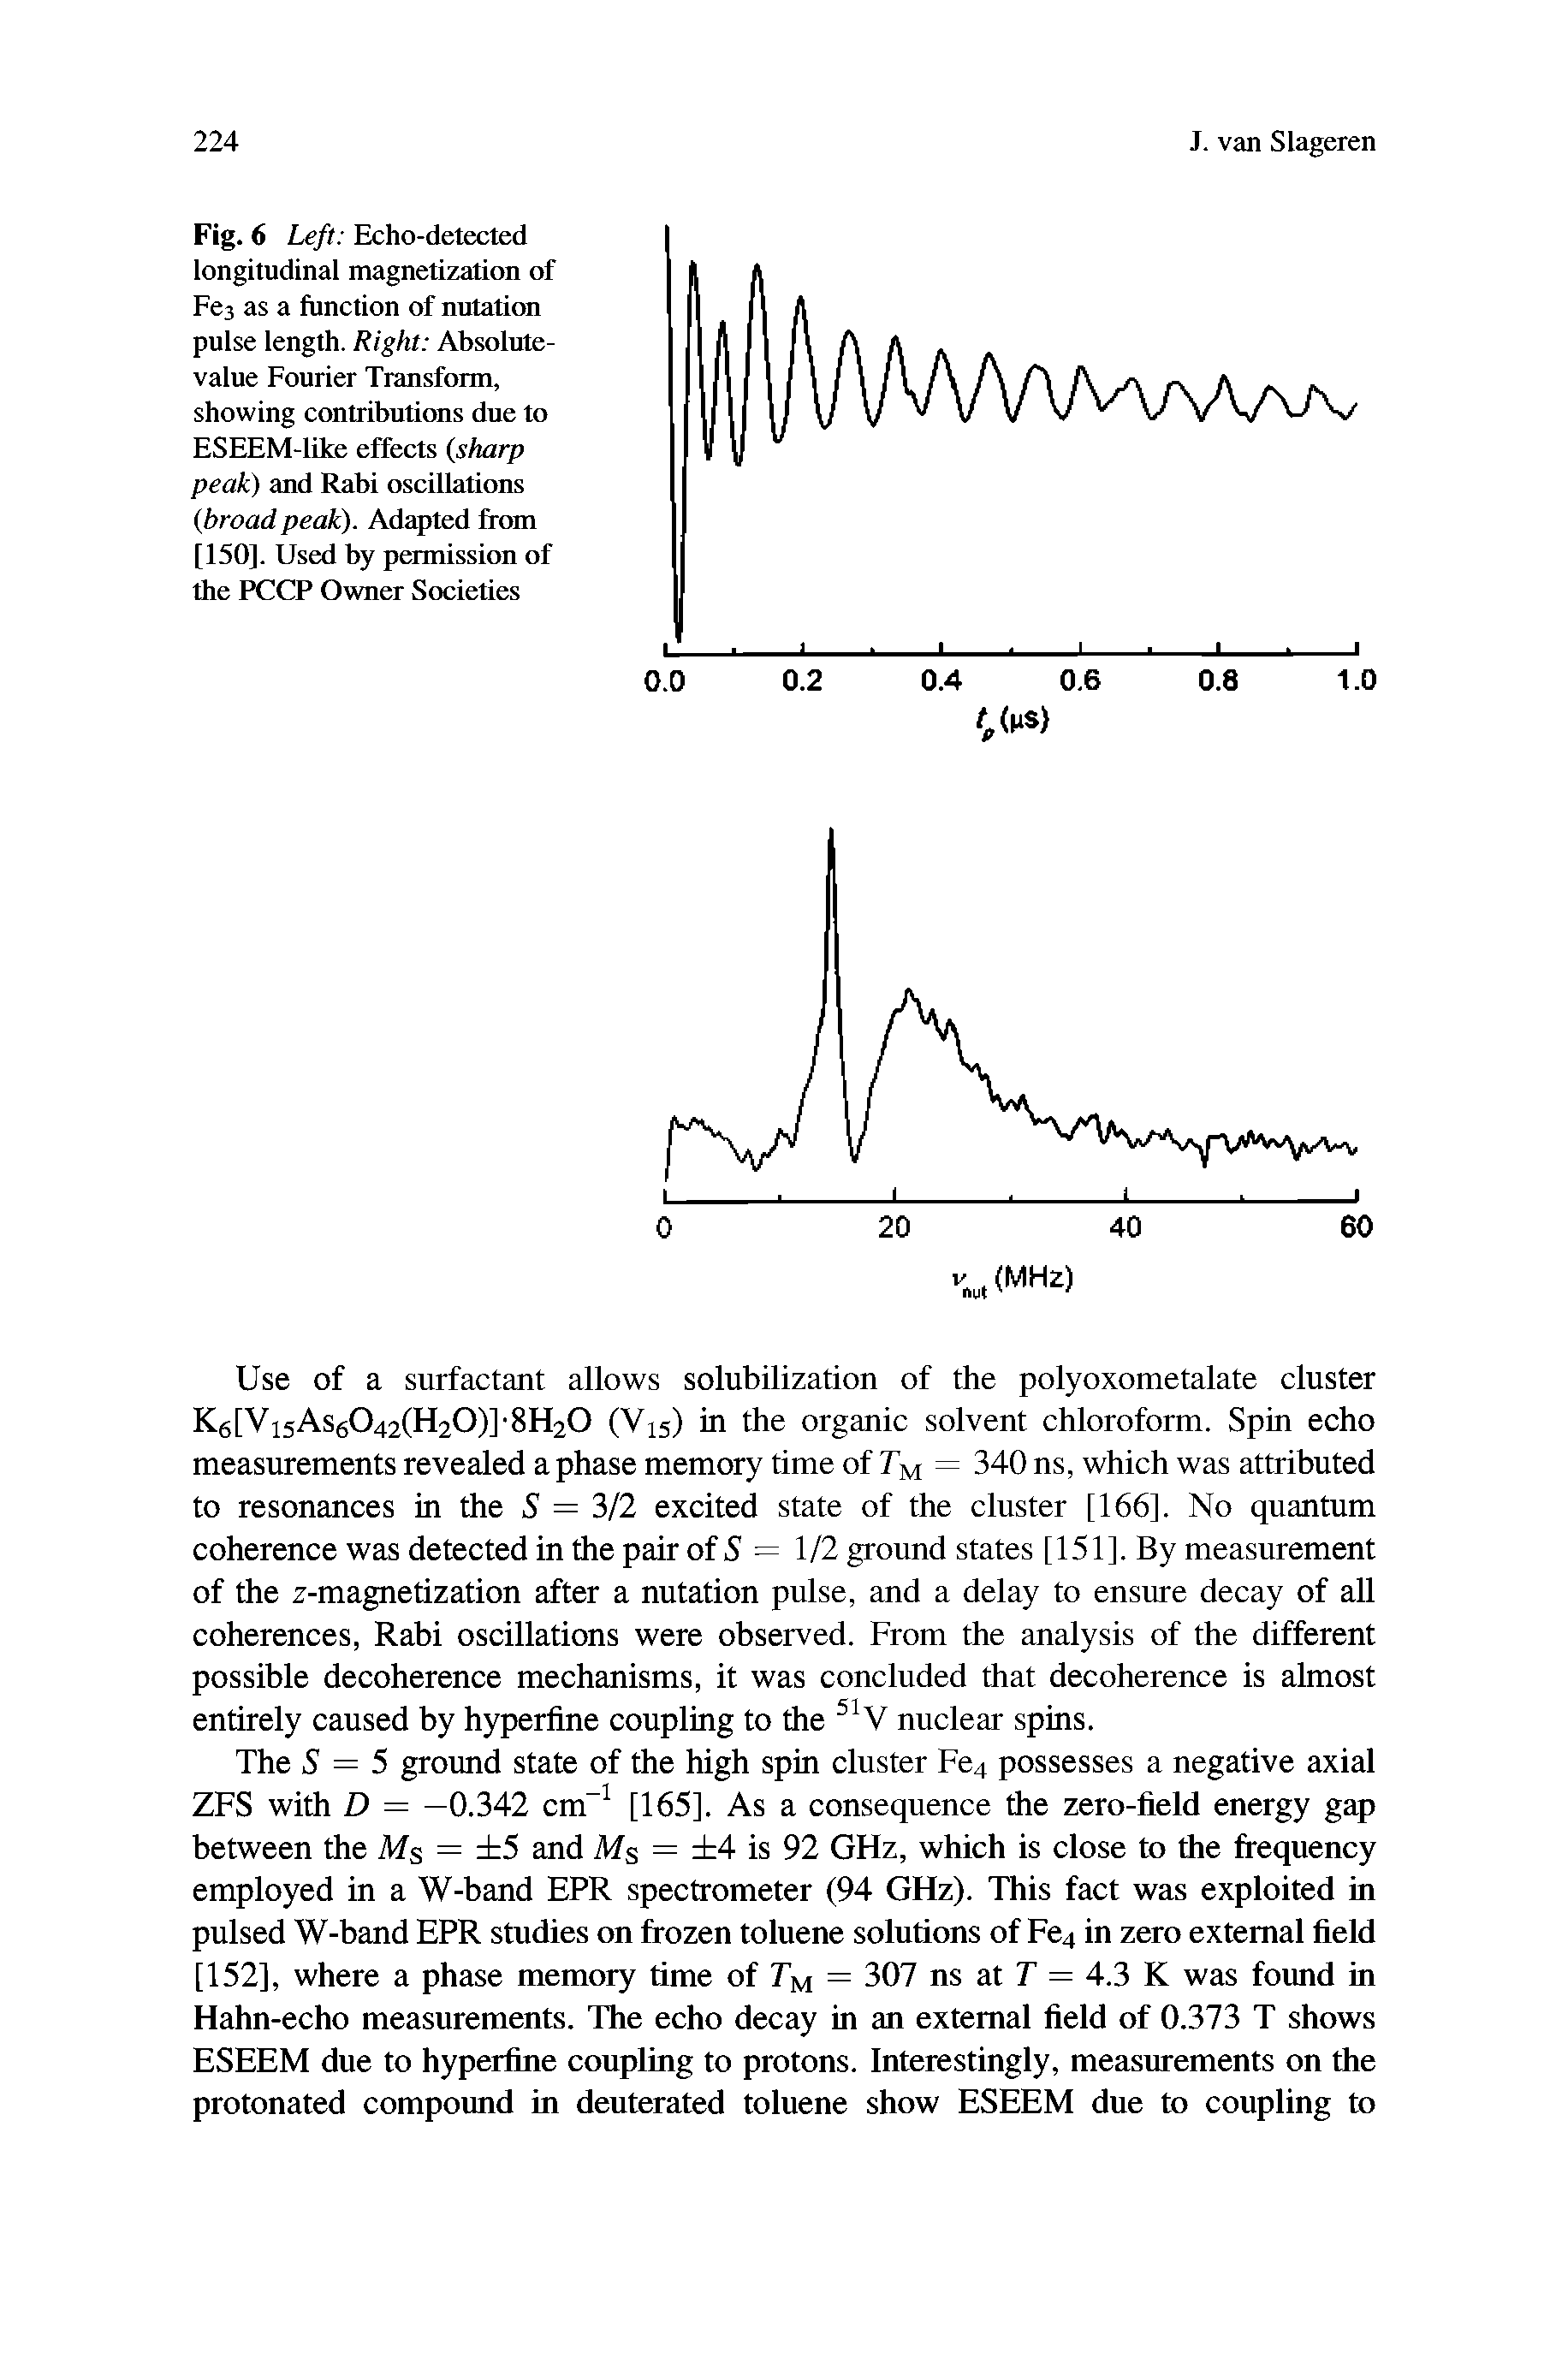 Fig. 6 Left Echo-detected longitudinal magnetization of Fea as a function of nutation pulse length. Right Absolute-value Fourier Transform, showing contributions due to ESEEM-like effects (sharp peak) and Rabi oscillations broad peak). Adapted from [150]. Used by permission of the PCCP Owner Societies...